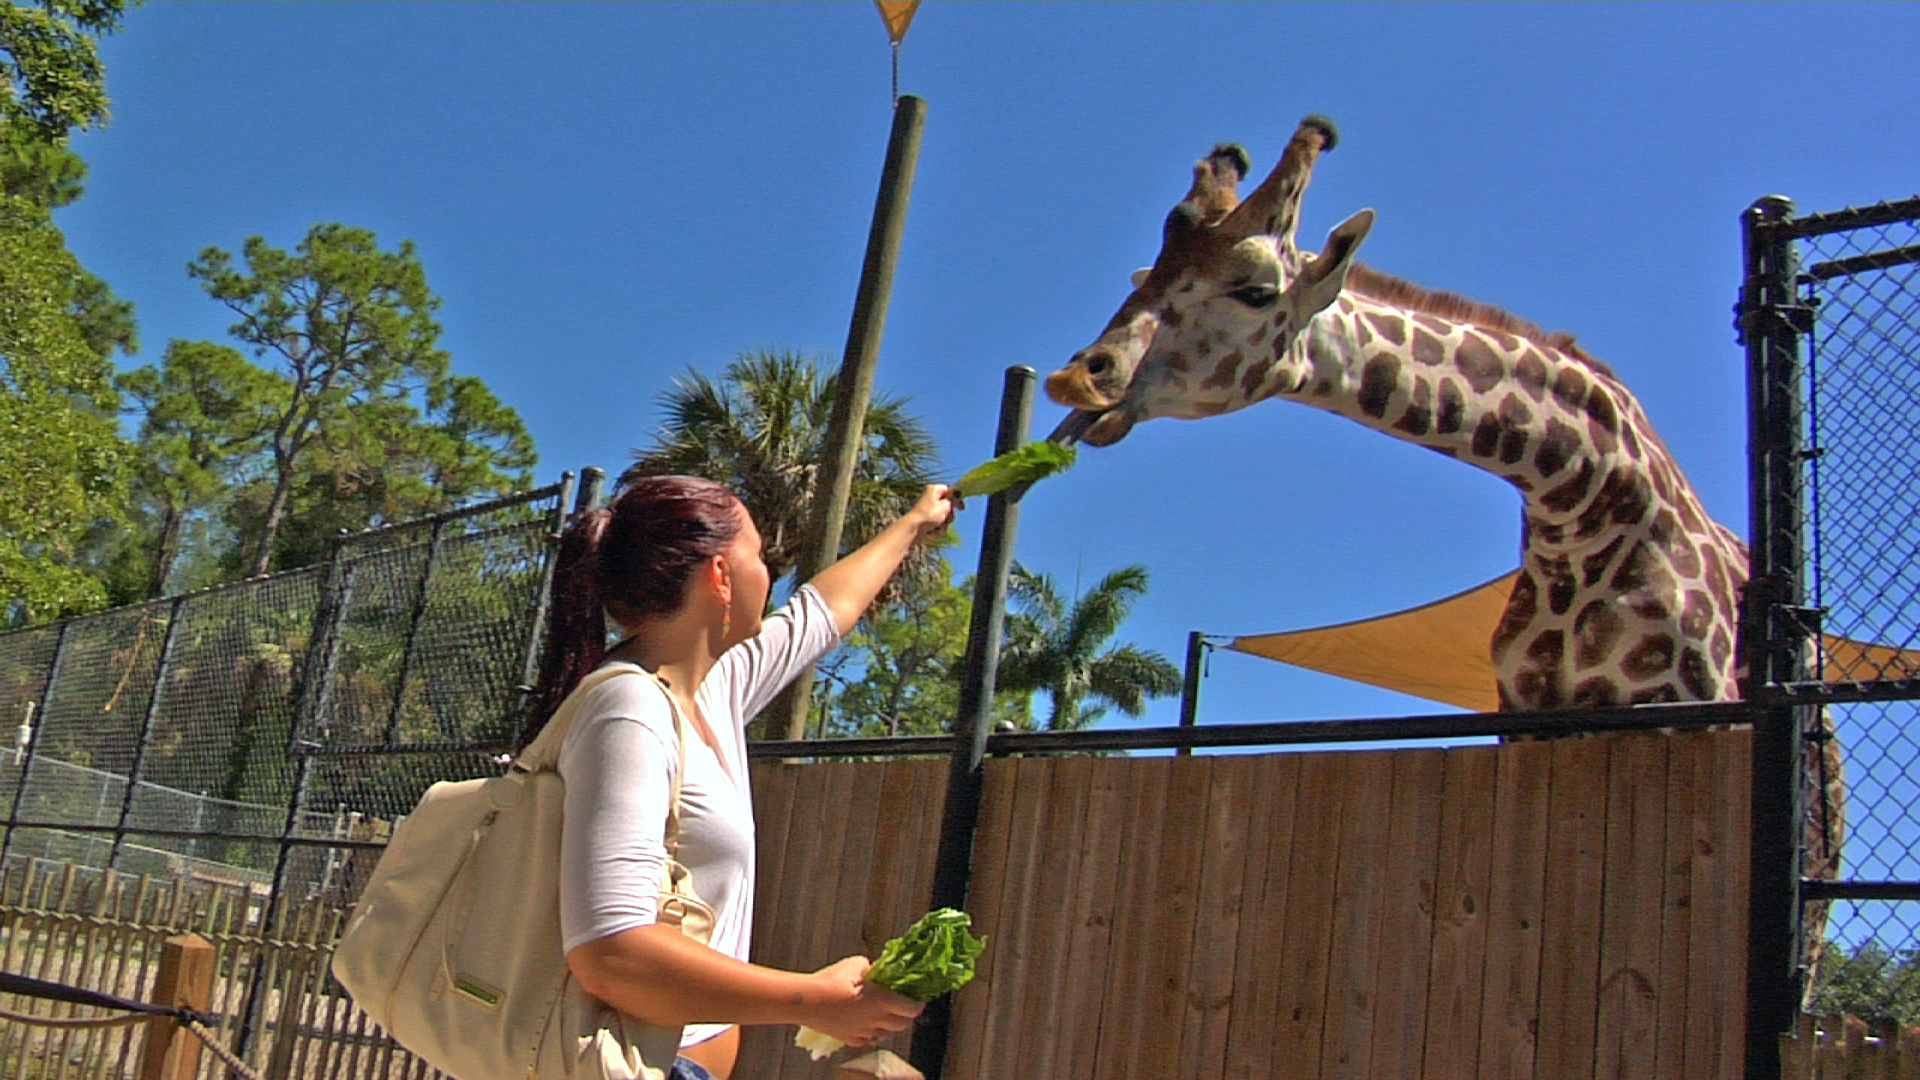 SWFL-TV – Hand-feed the Giraffes at the Naples Zoo